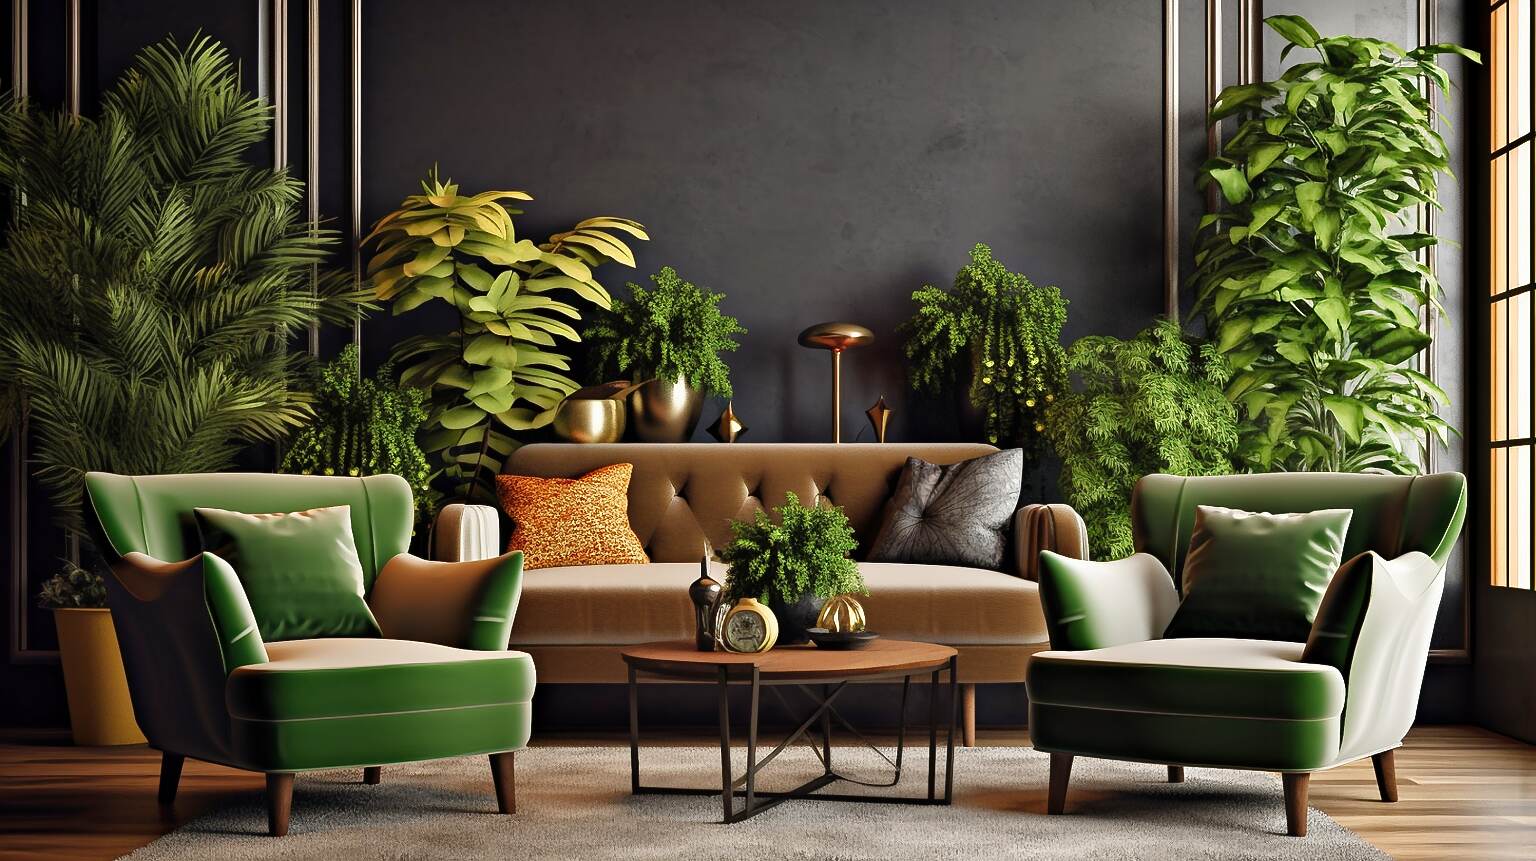 Image Of A Modern Living Room With A Greenery